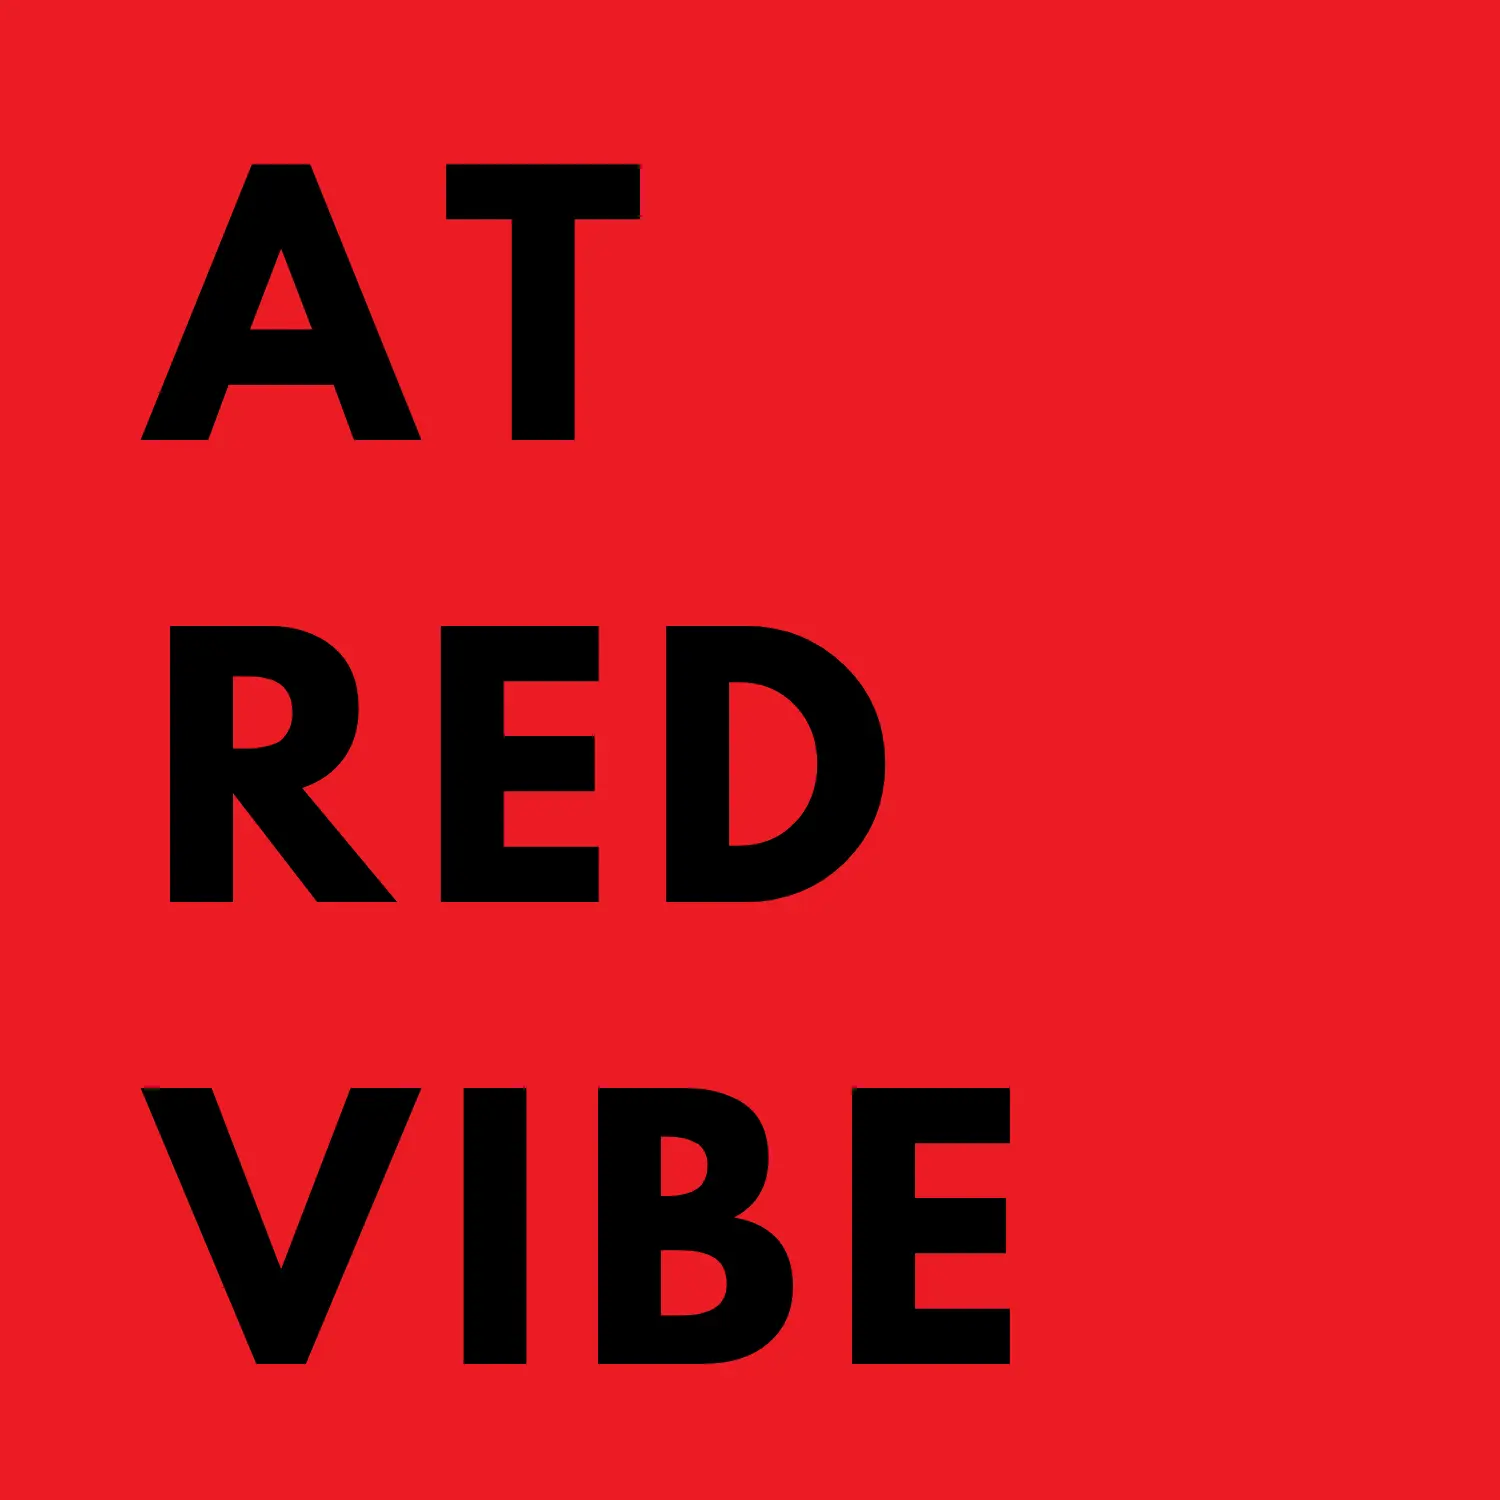 At Red Vibe